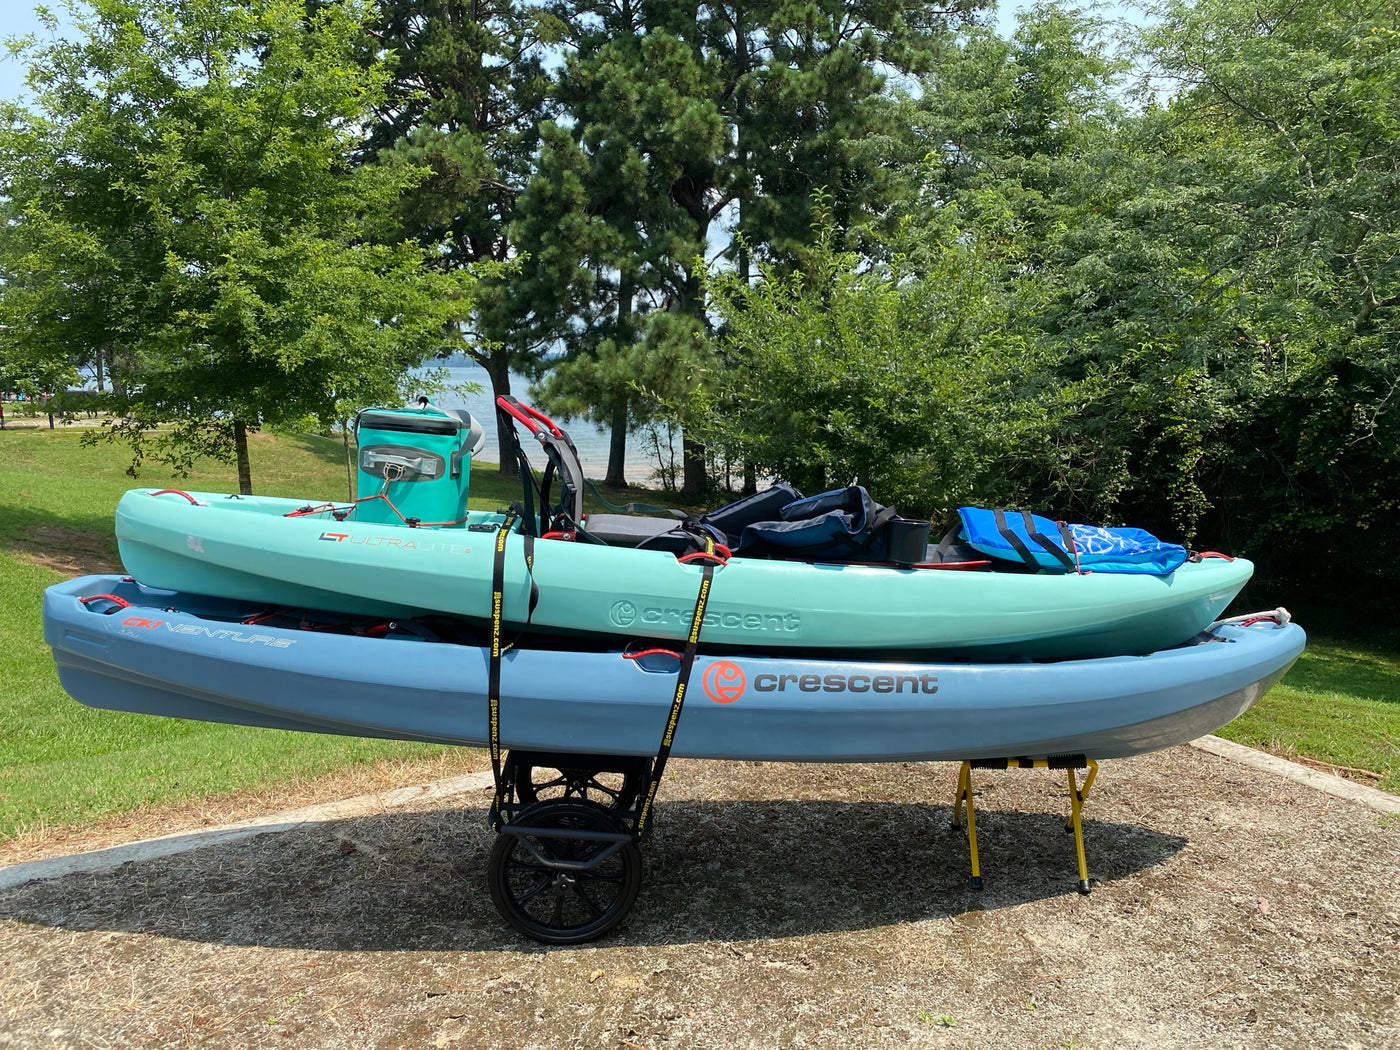 2 kayaks loaded on the All-terrain cart and small universal portable stand